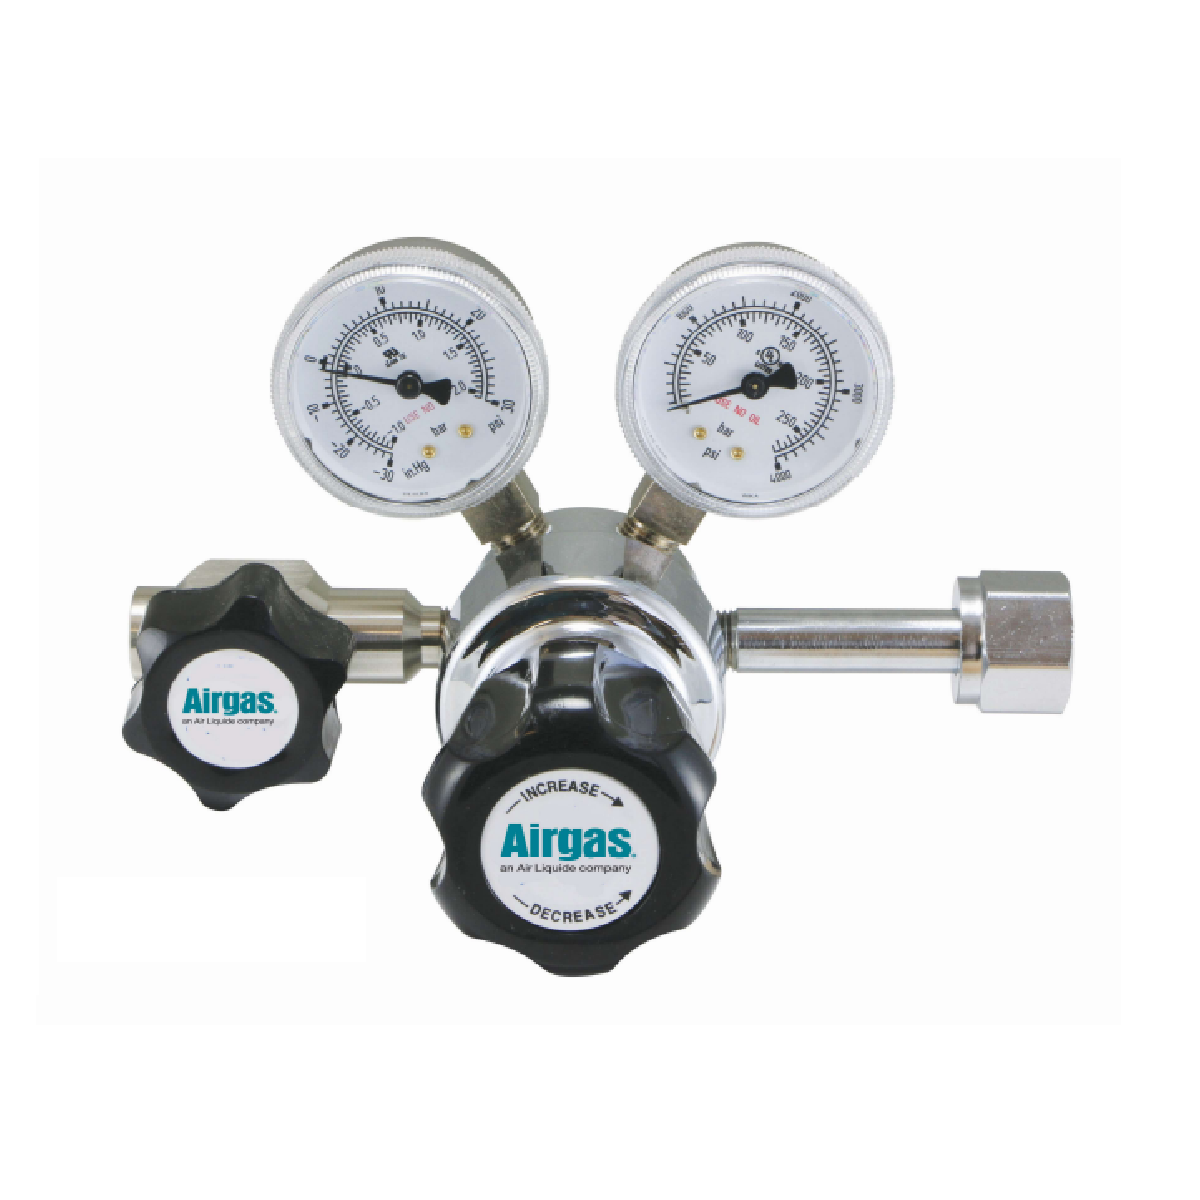 Airgas Model 205D540 Chrome-Plated Brass High Purity Single Stage Regulator With CGA-540 Connection